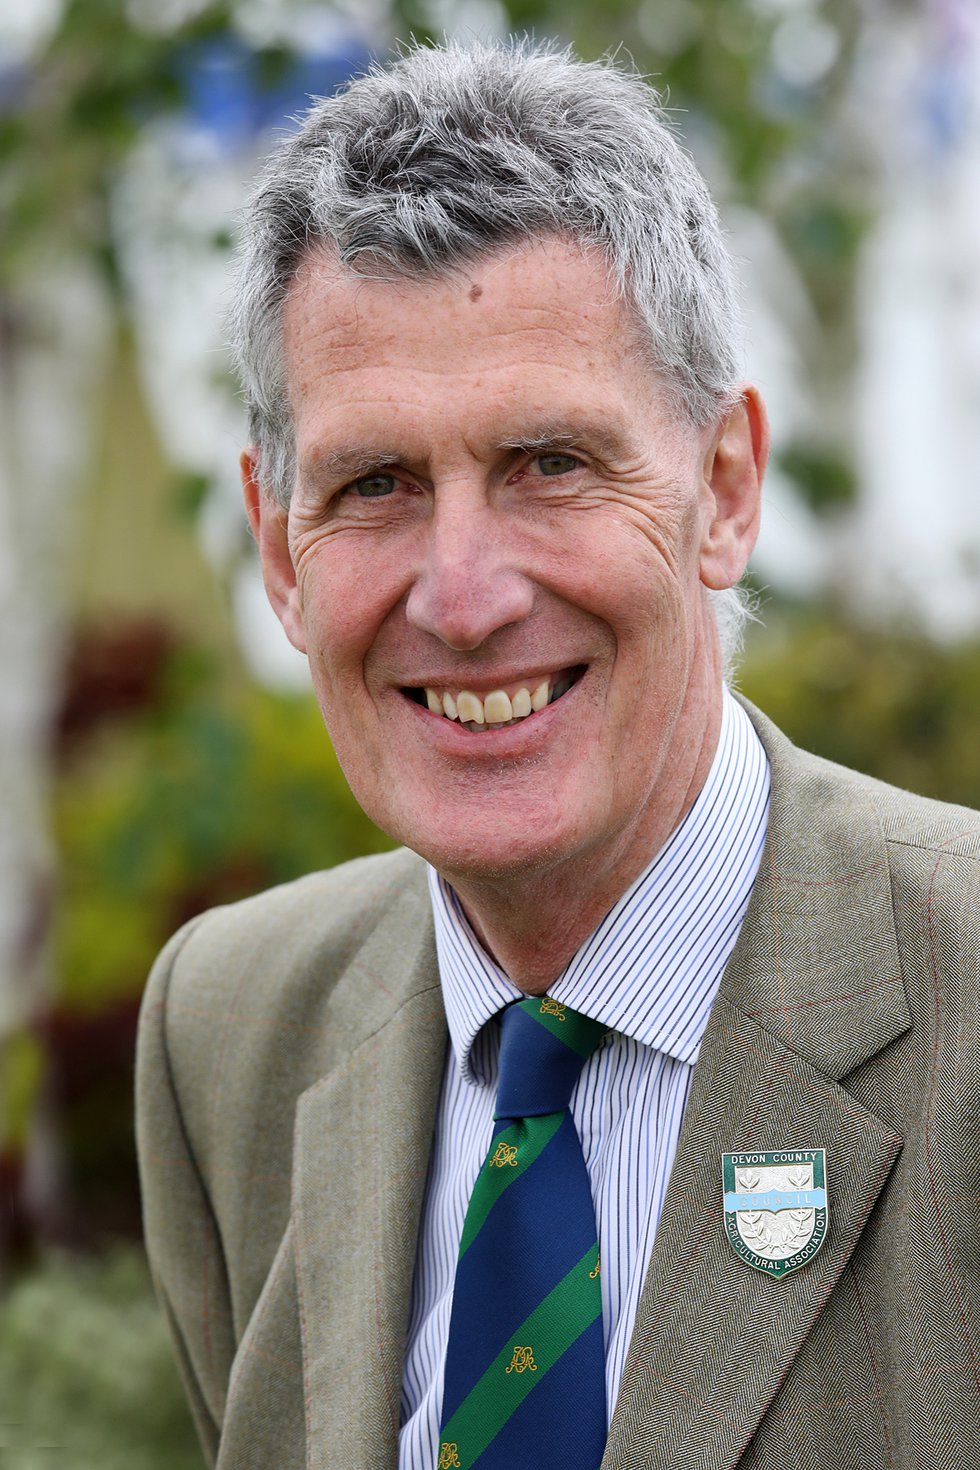 David Fursdon, The Lord-Lieutenant of Devon will take the official salute at the Great Devon Parade 2021